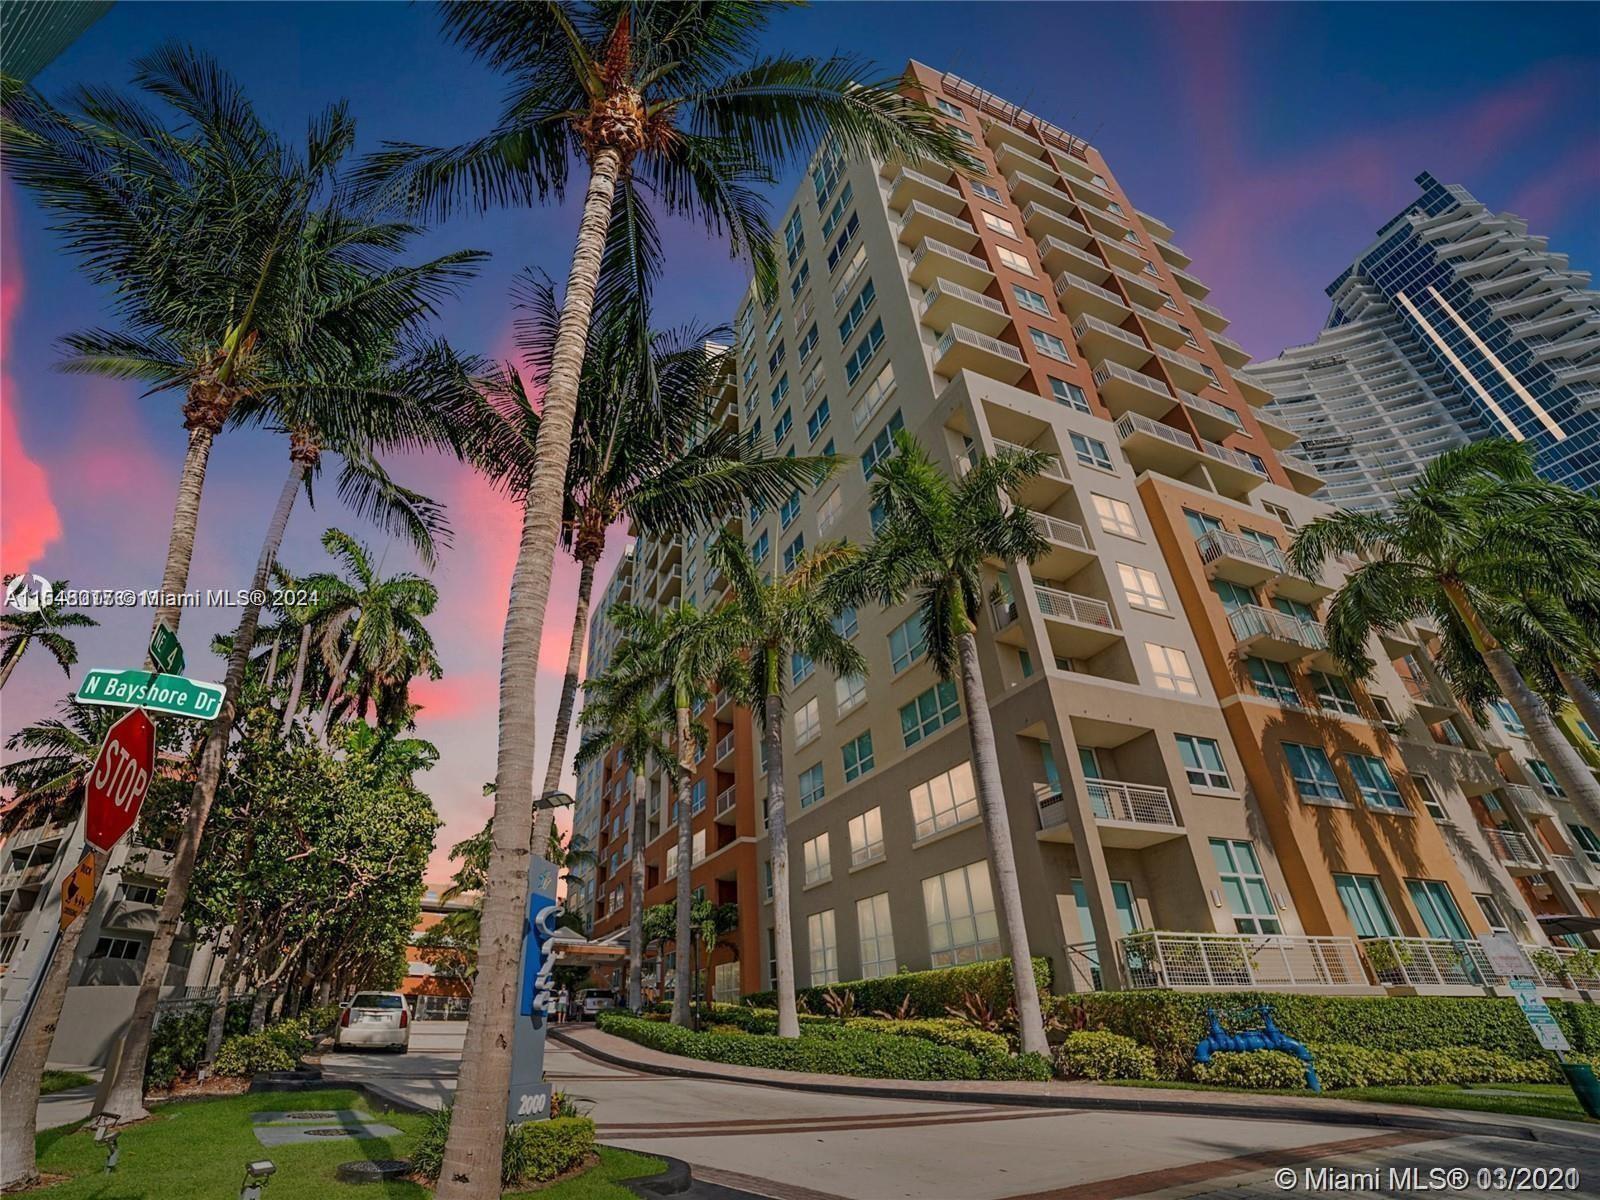 Beautifully upgraded condominium. Includes an upgraded kitchen, hardwood flooring, 2 assigned parking spaces. Amenities include heated pool, fitness center, concierge,covered parking,24 hr security & valet. Walk to Margaret Pace Waterfront Park & shops/restaurants/galleries on Biscayne Blvd. Located a few blocks to Metromover w/access to downtown Miami, Bayside, Kaseya Center, Brickell, Brightline & MetroRail service.